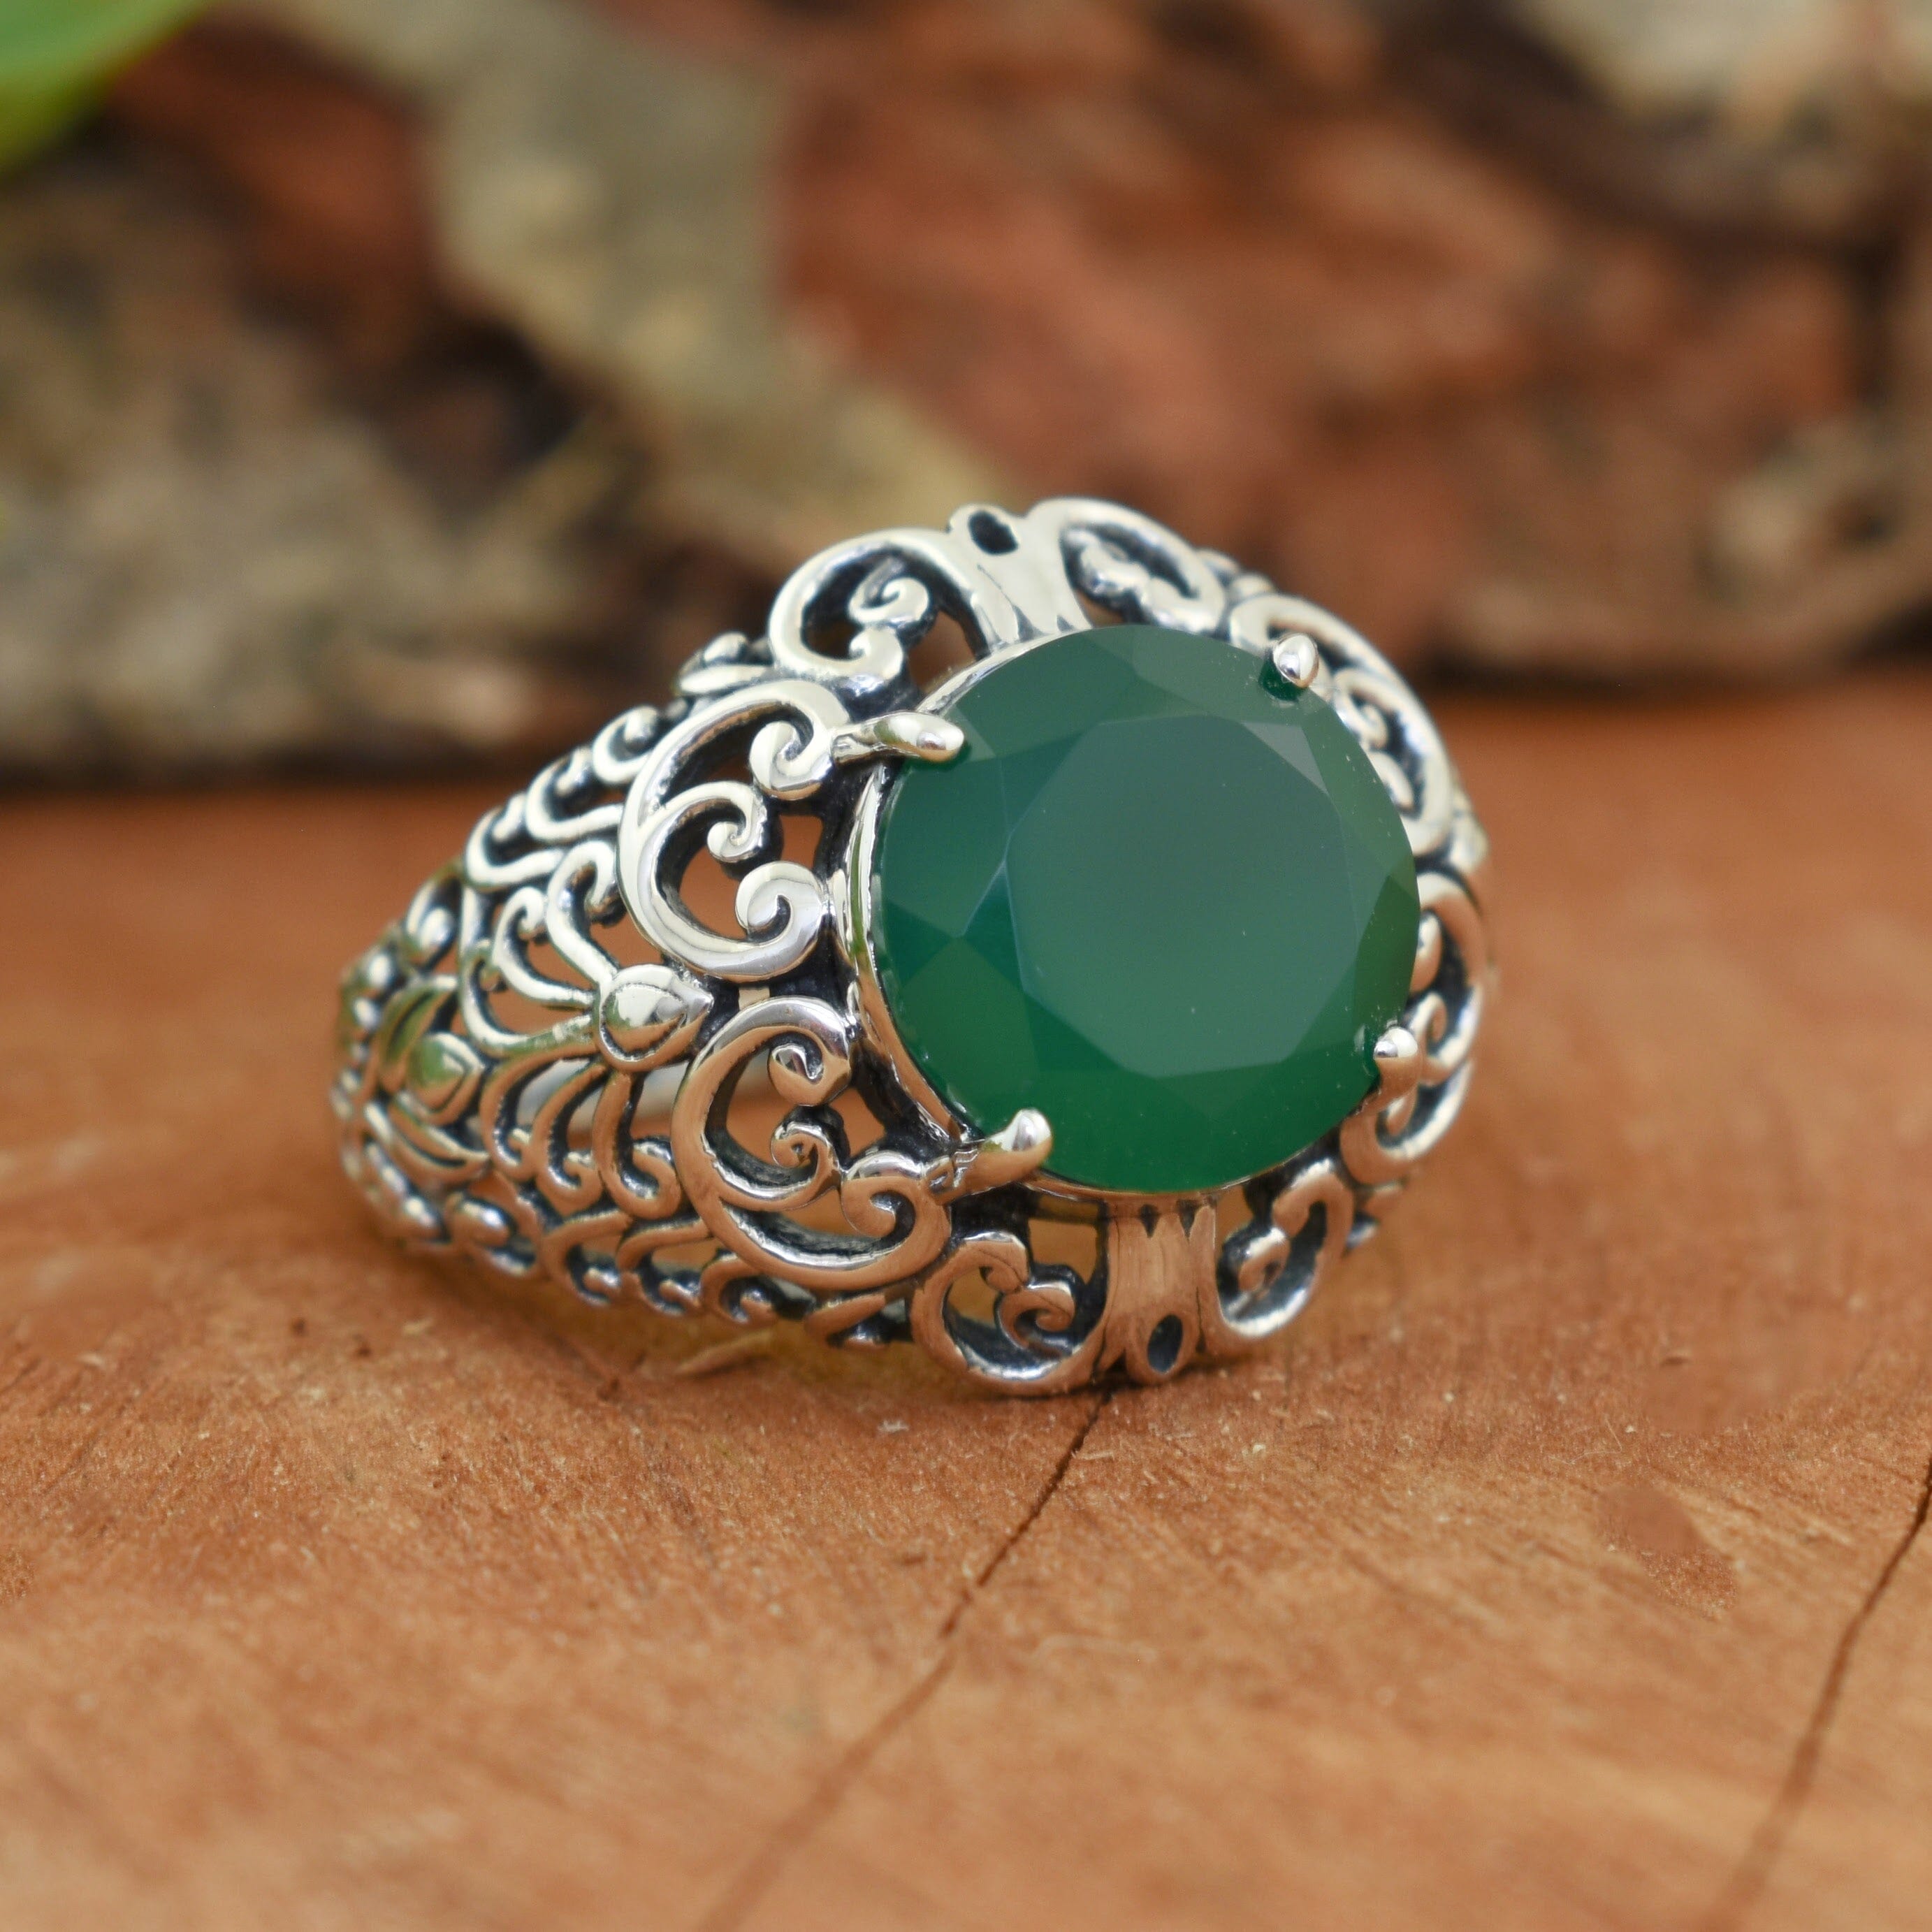 Ornate sterling silver ring with green stone